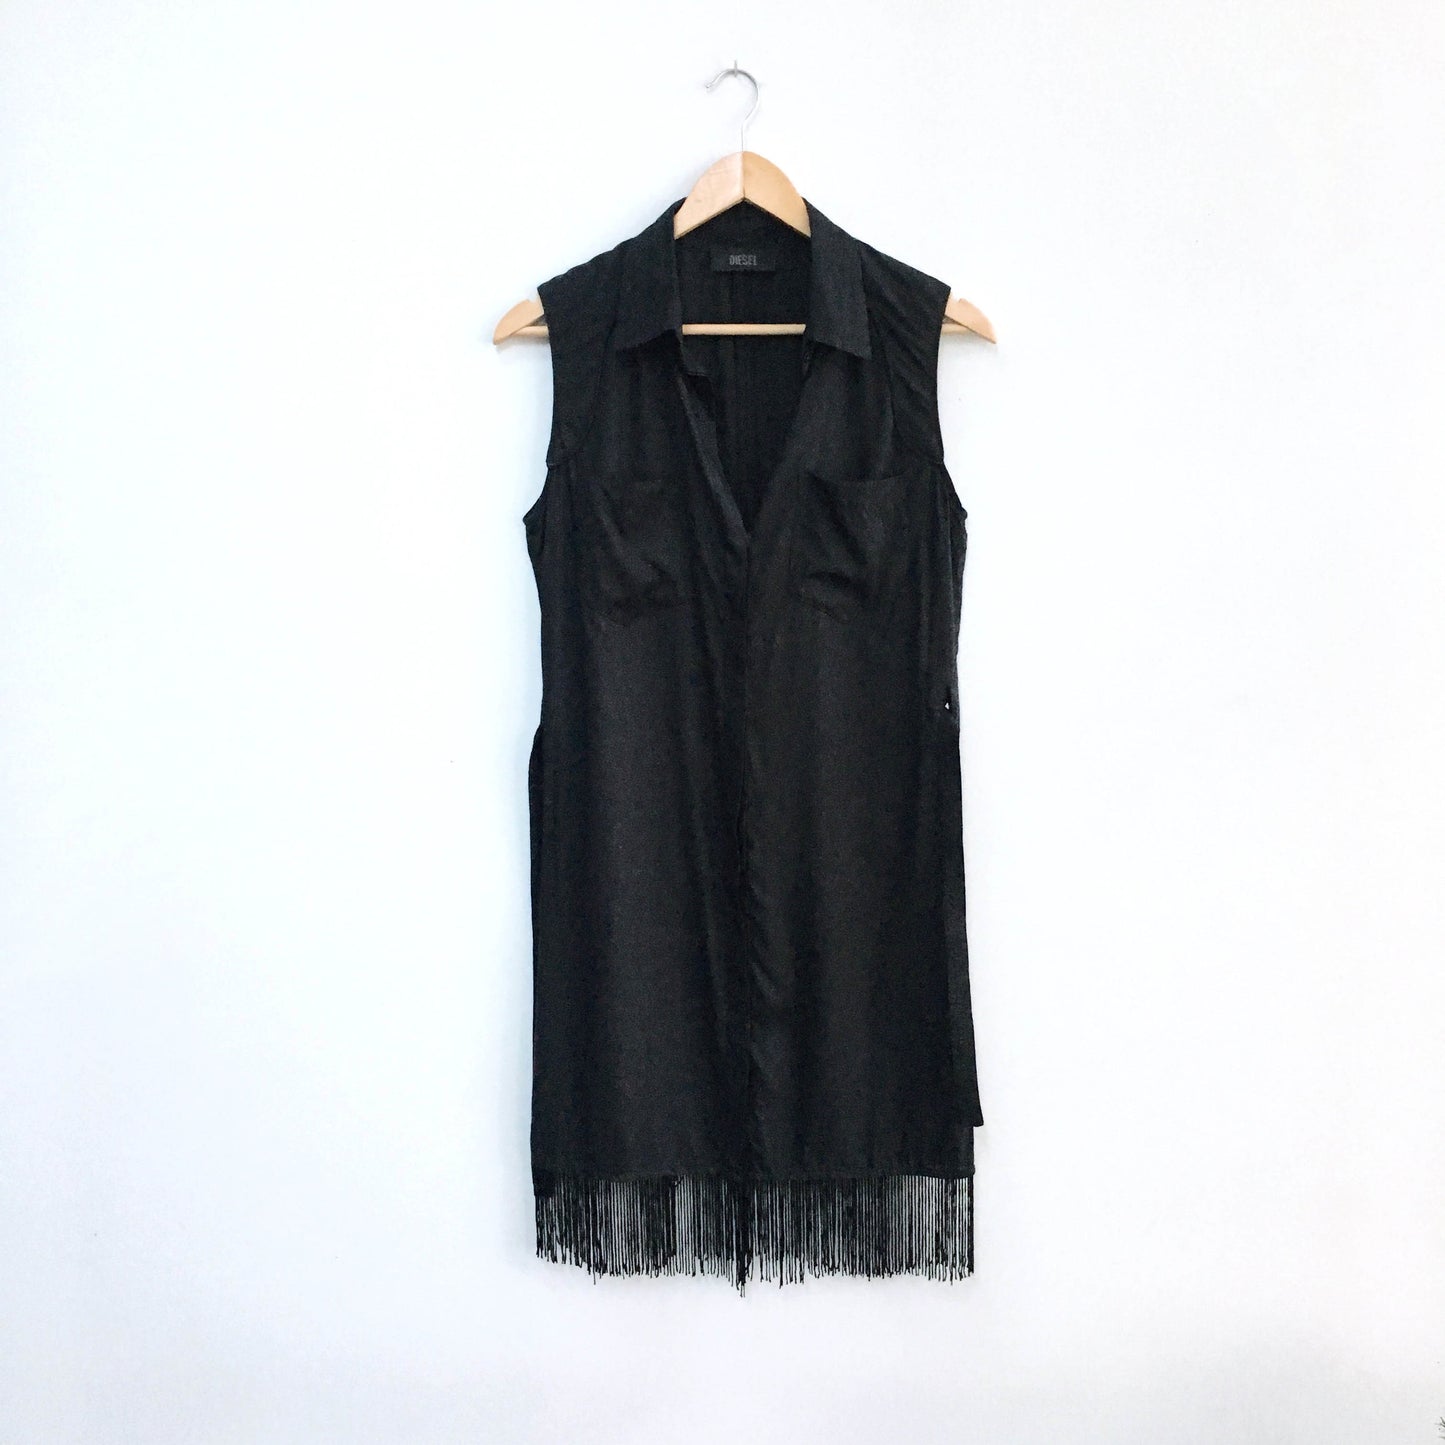 Diesel Shirtdress with Fringe - size xs